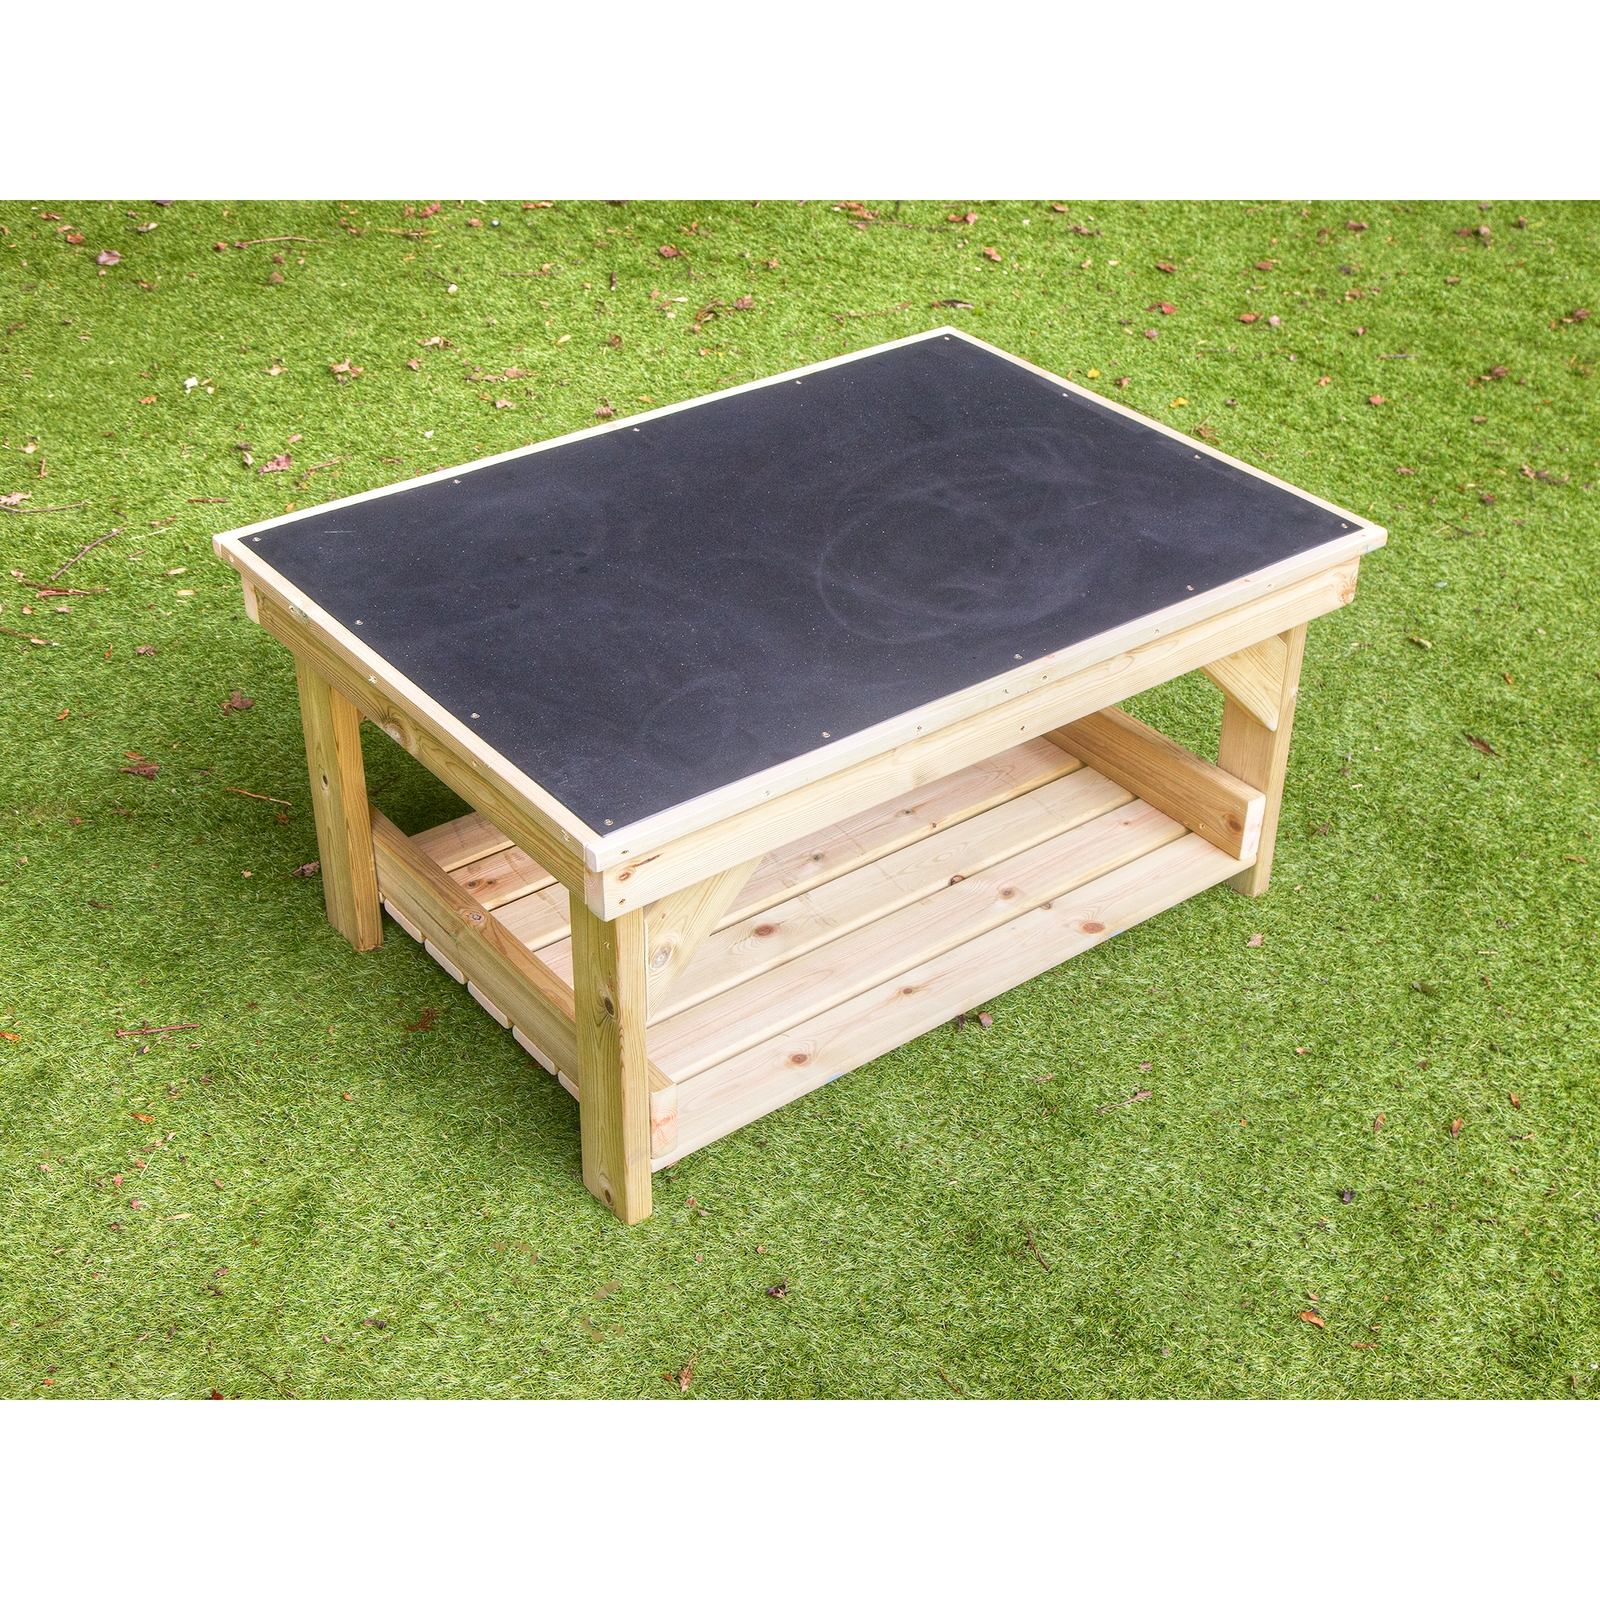 Play Table with Chalkboard Top